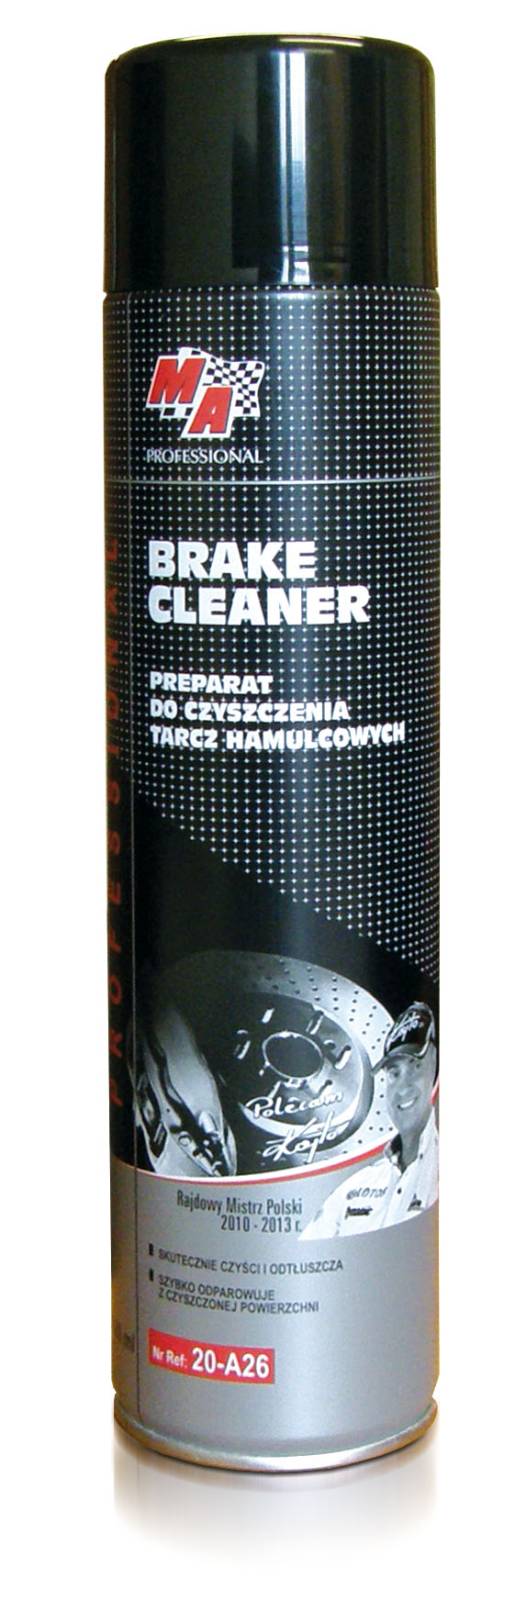 ZMYWACZ DO HAMULCOW SPRAY BRAKE CLEANER MA PROFESSIONAL 600ML AMTRA 20-A26 AMTRA